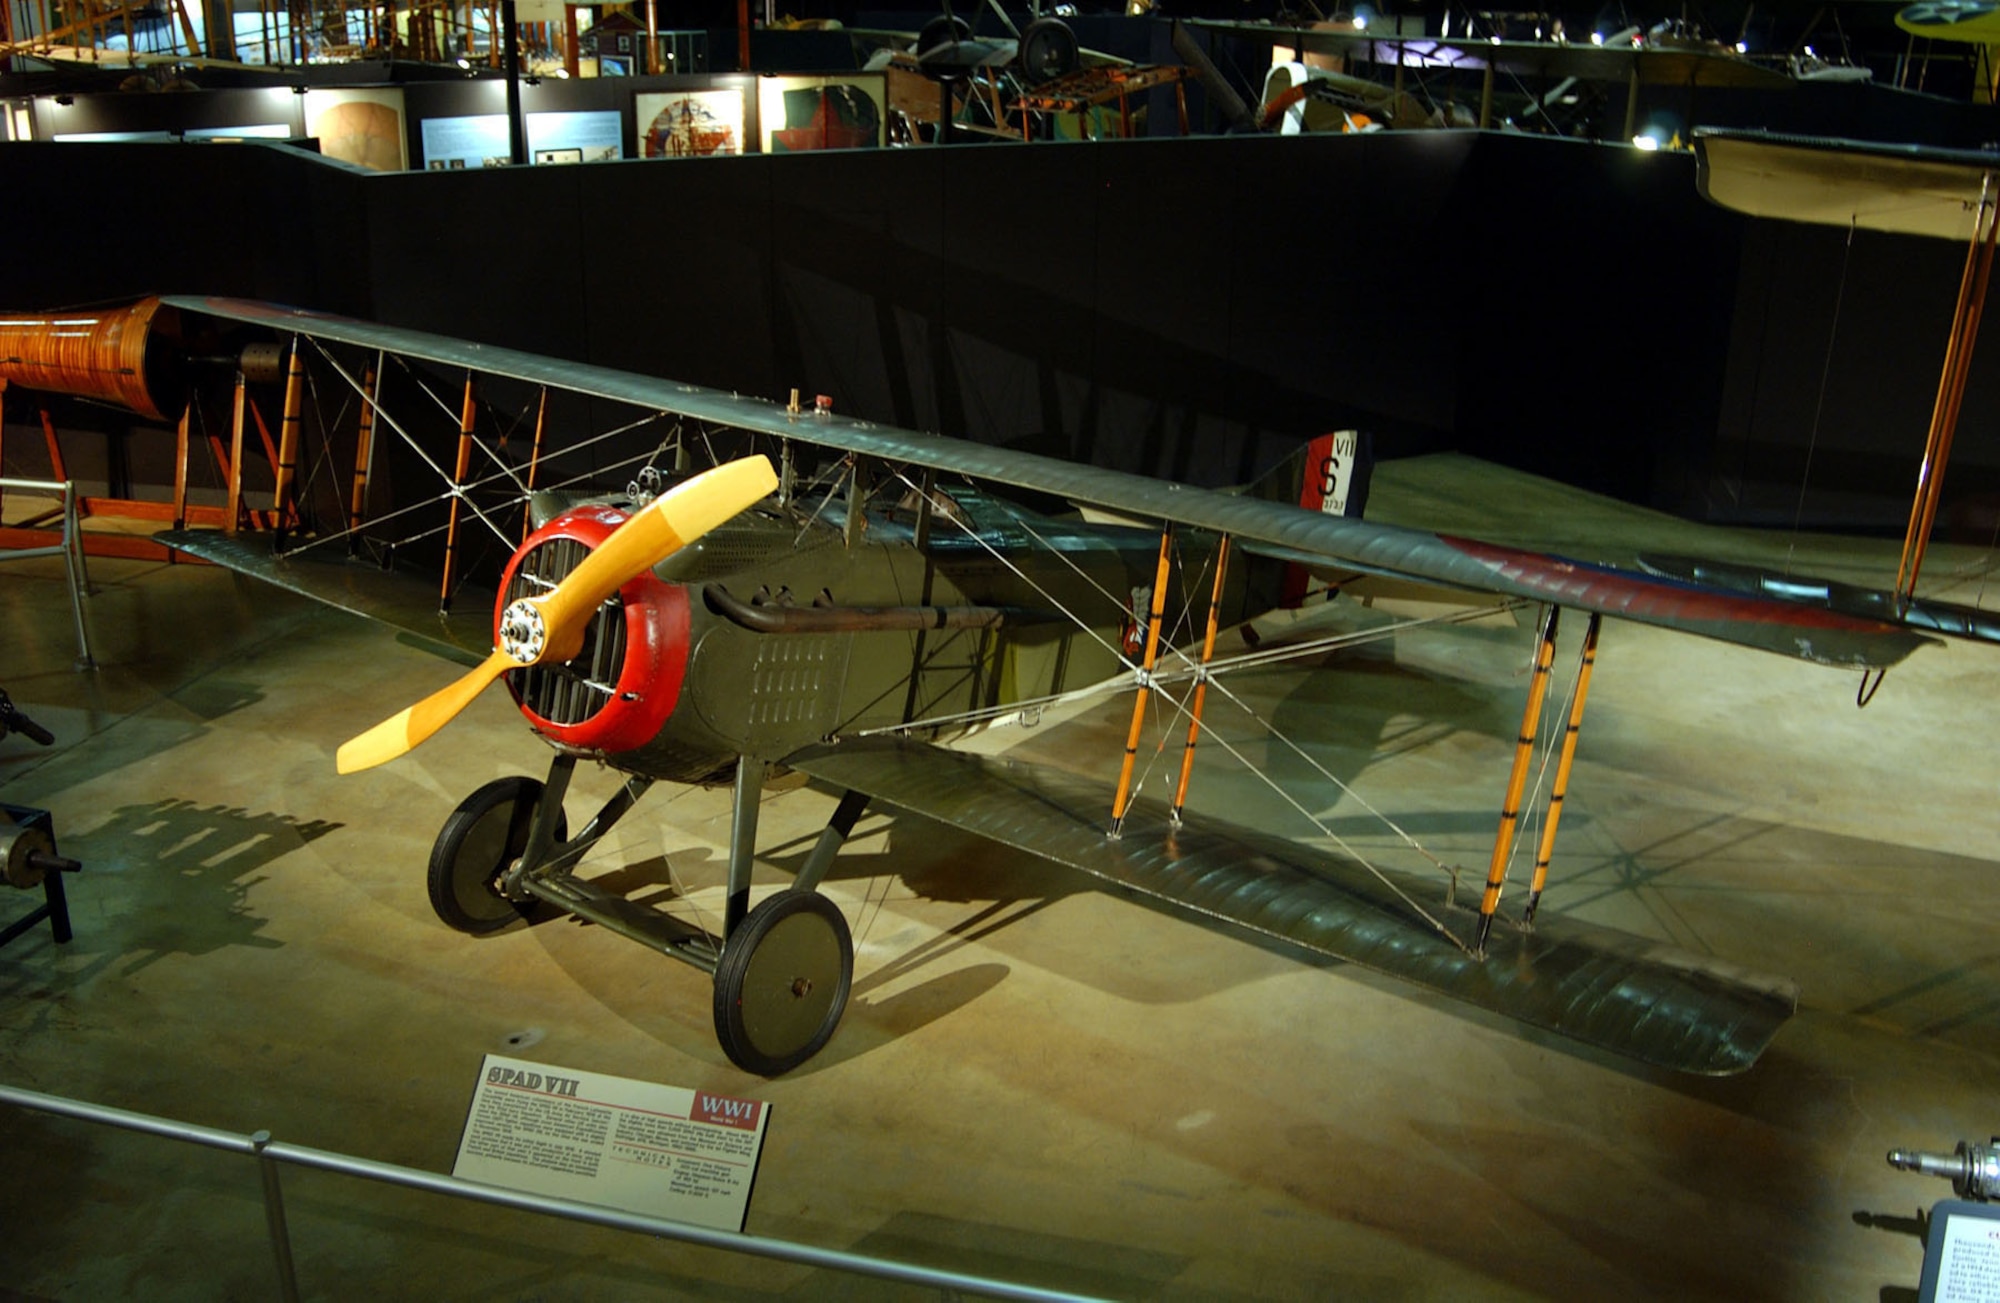 DAYTON, Ohio -- SPAD VII in the Early Years Gallery at the National Museum of the United States Air Force. (U.S. Air Force photo)